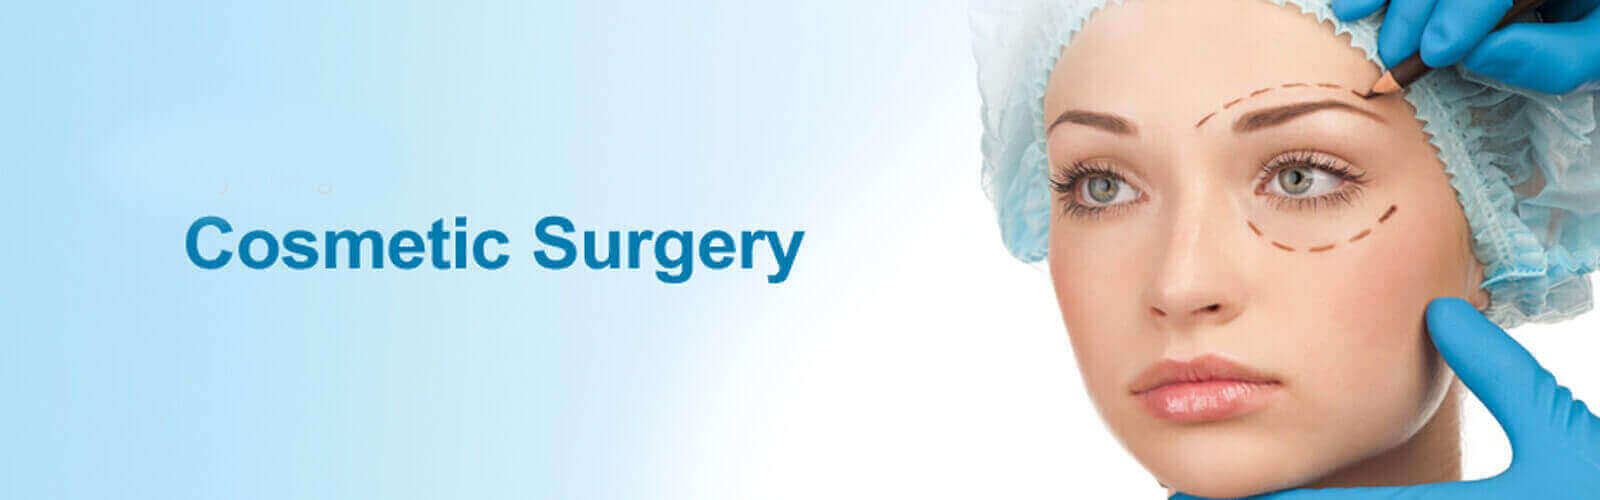 Cosmetic Surgery in San Francisco